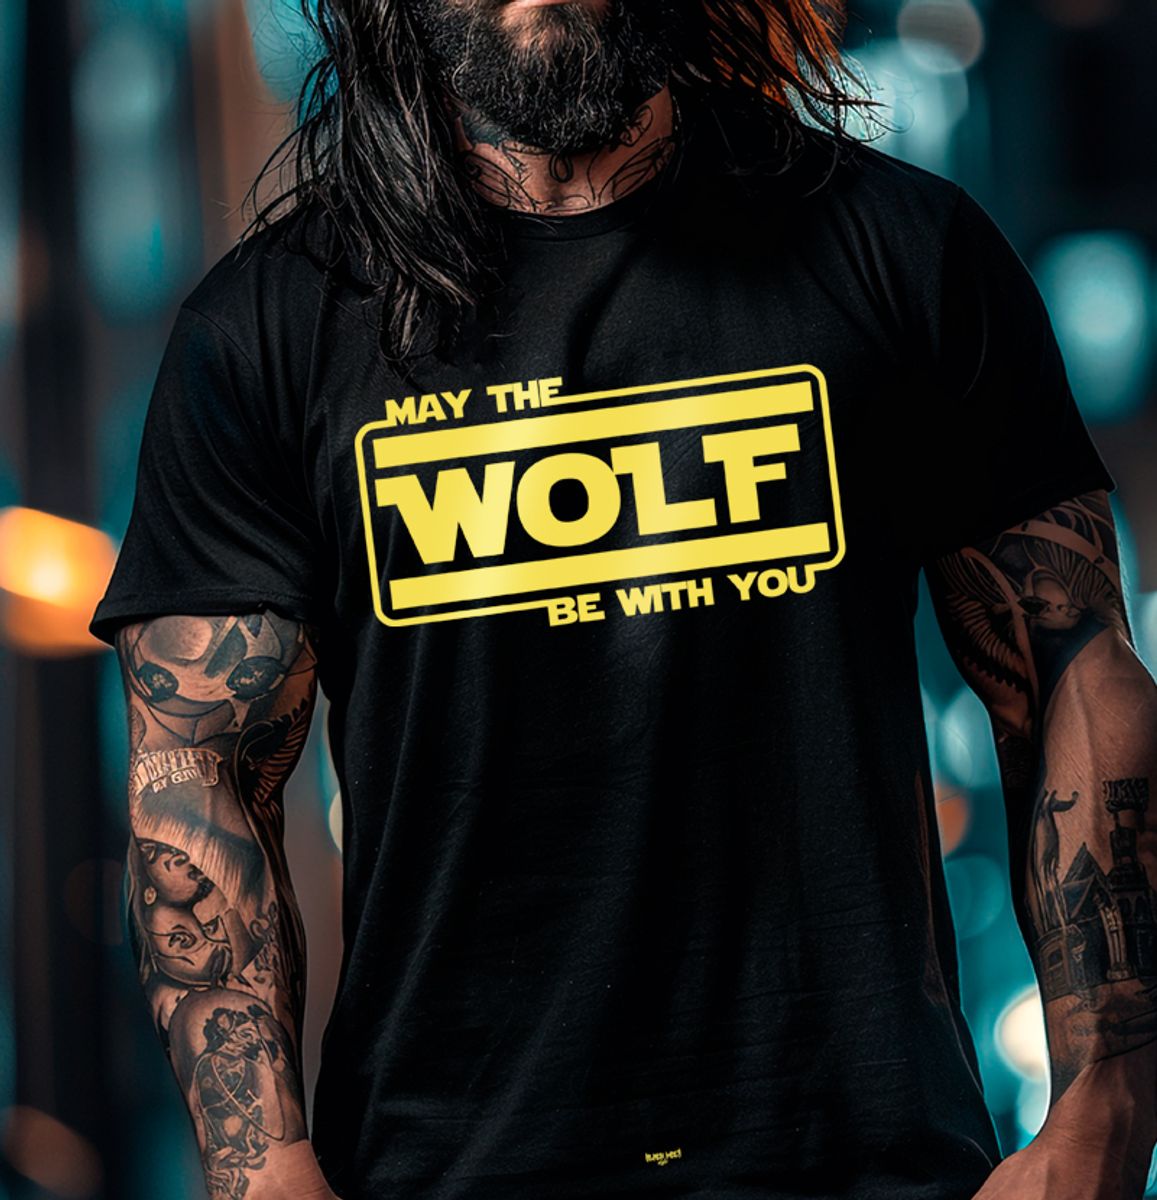 Nome do produto: May the Wolf Be with You